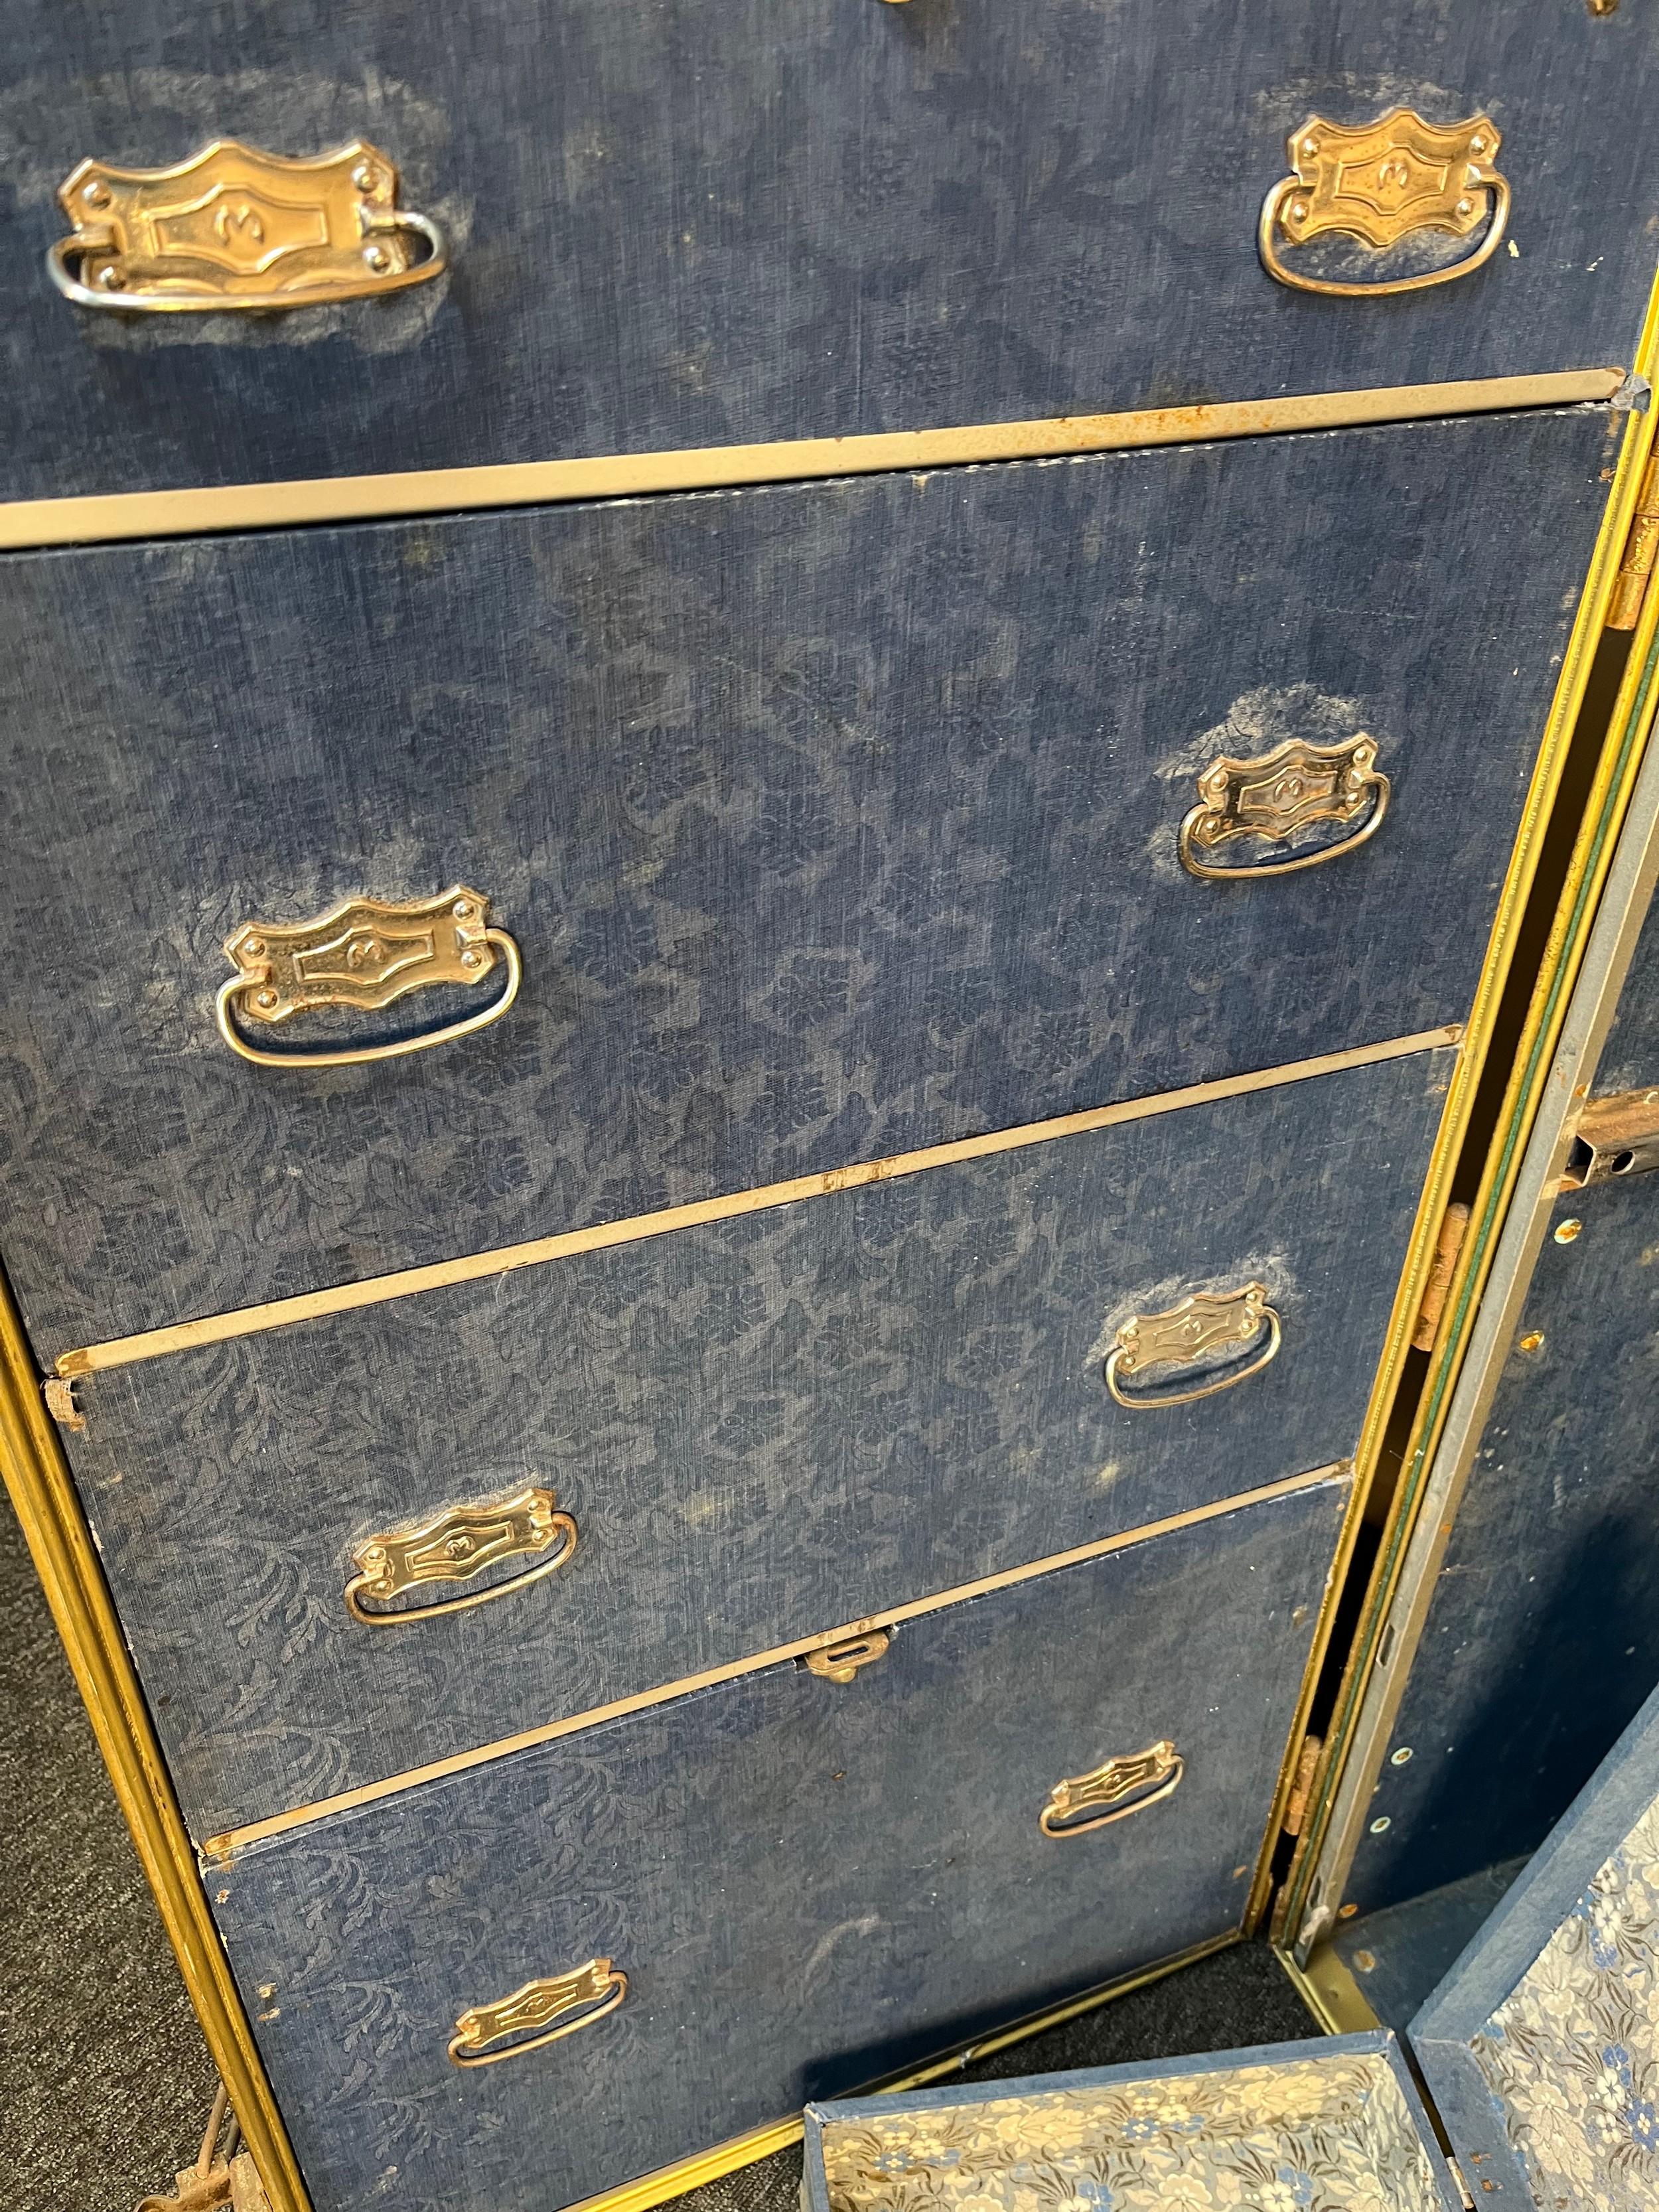 Vintage travel trunk [Mendel Trunk] with fitted interior drawers and coat stand, complete with - Image 8 of 11